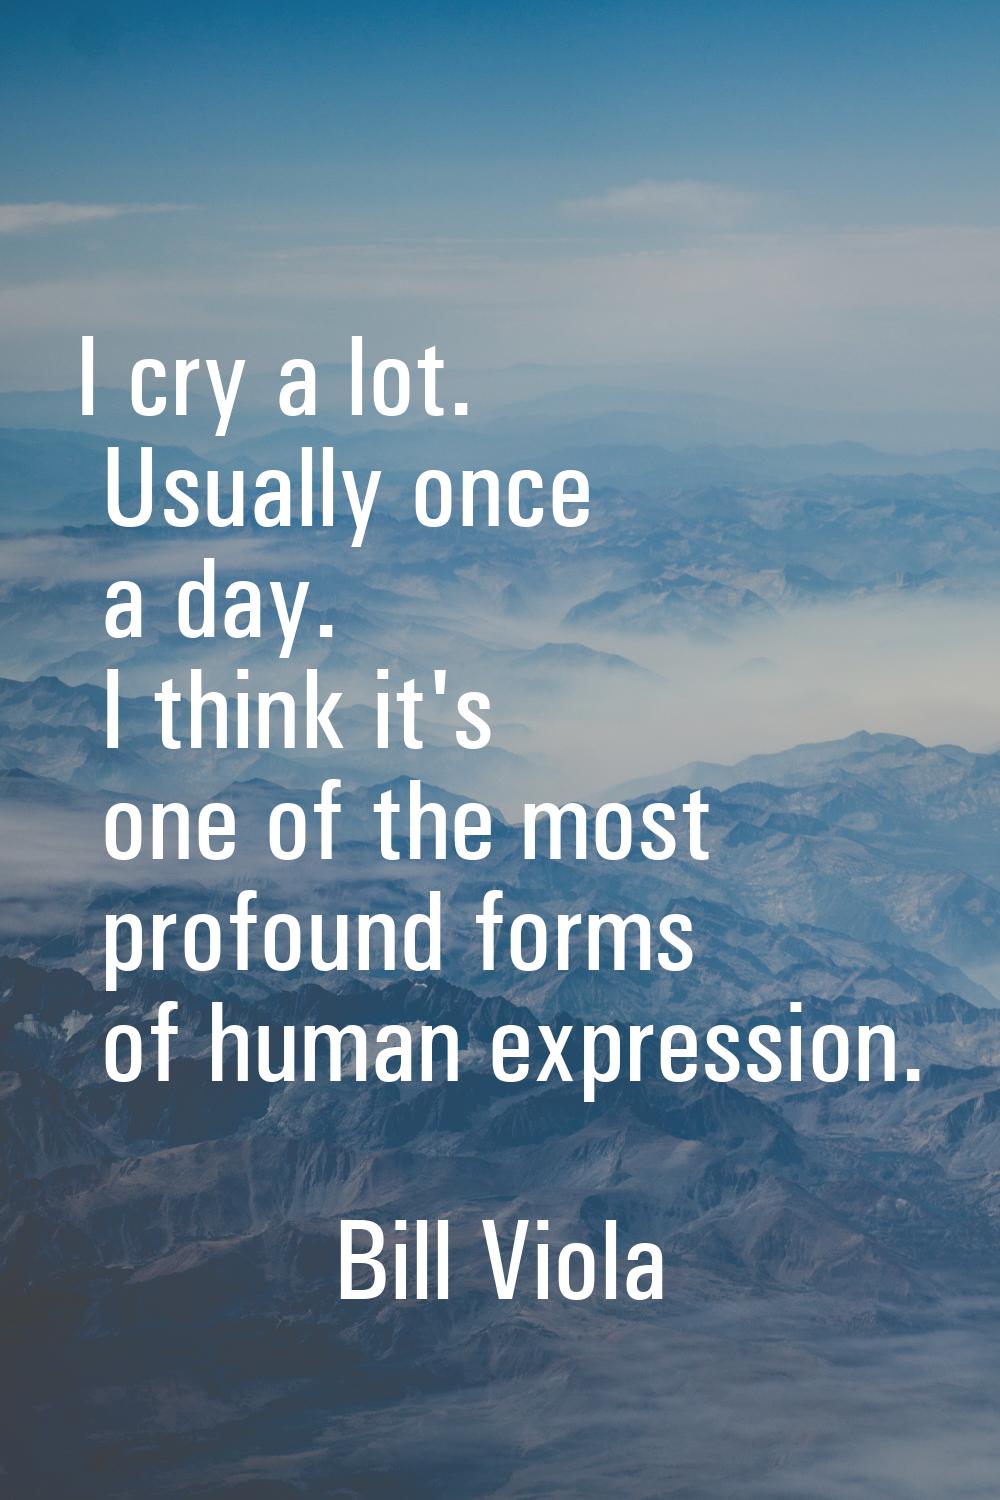 I cry a lot. Usually once a day. I think it's one of the most profound forms of human expression.